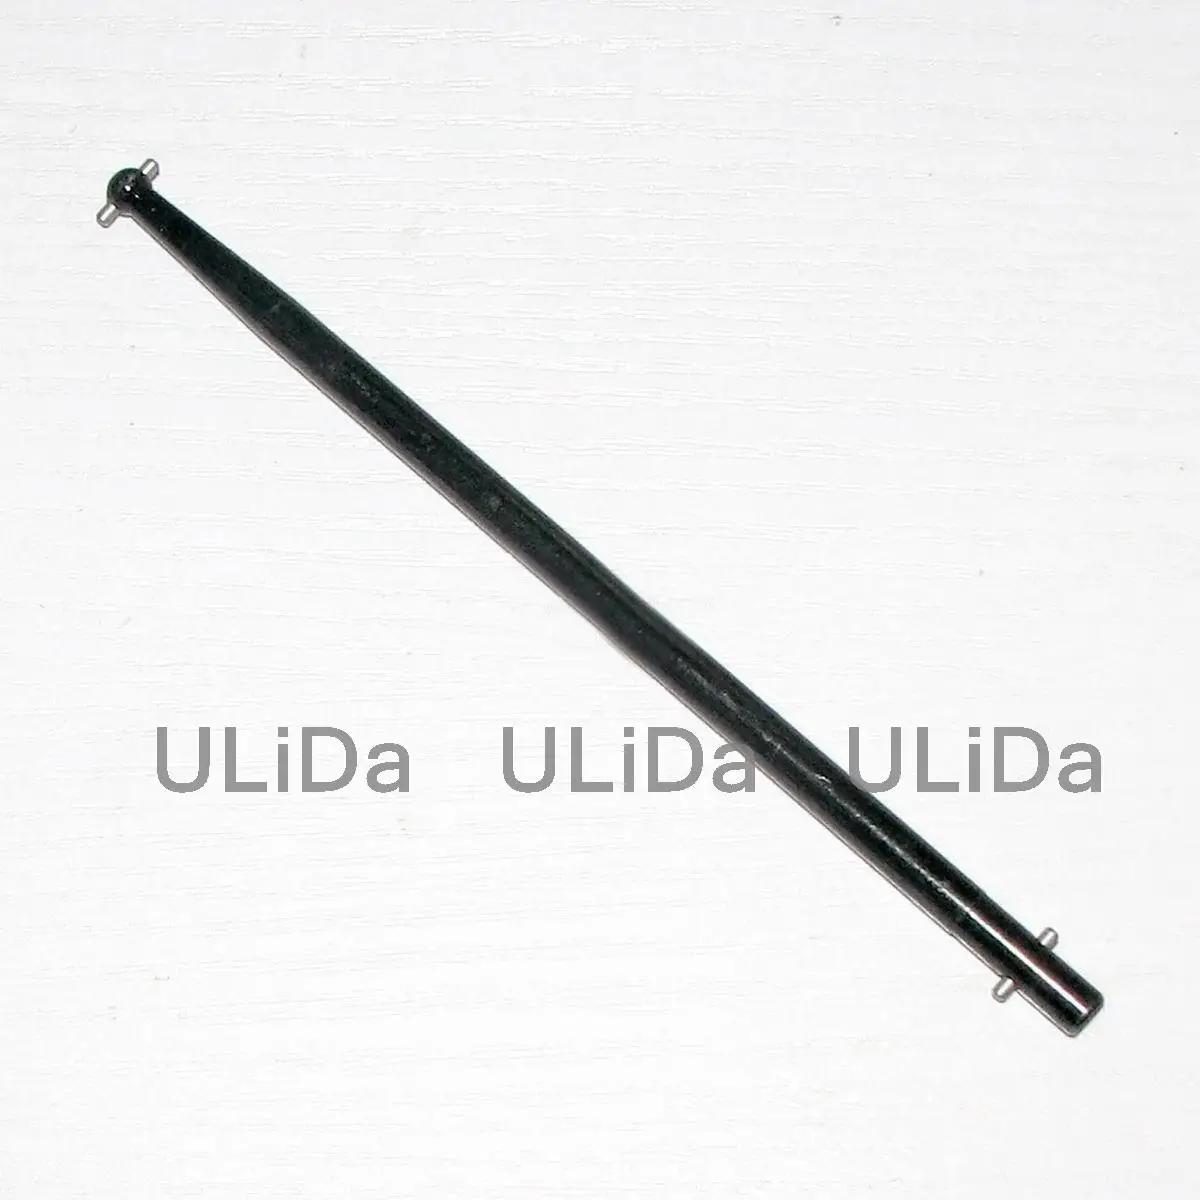 RC HSP 11003 Metal Power Starter 70111 Shaft Rod Pin End For Nitro VX 18 Engines 